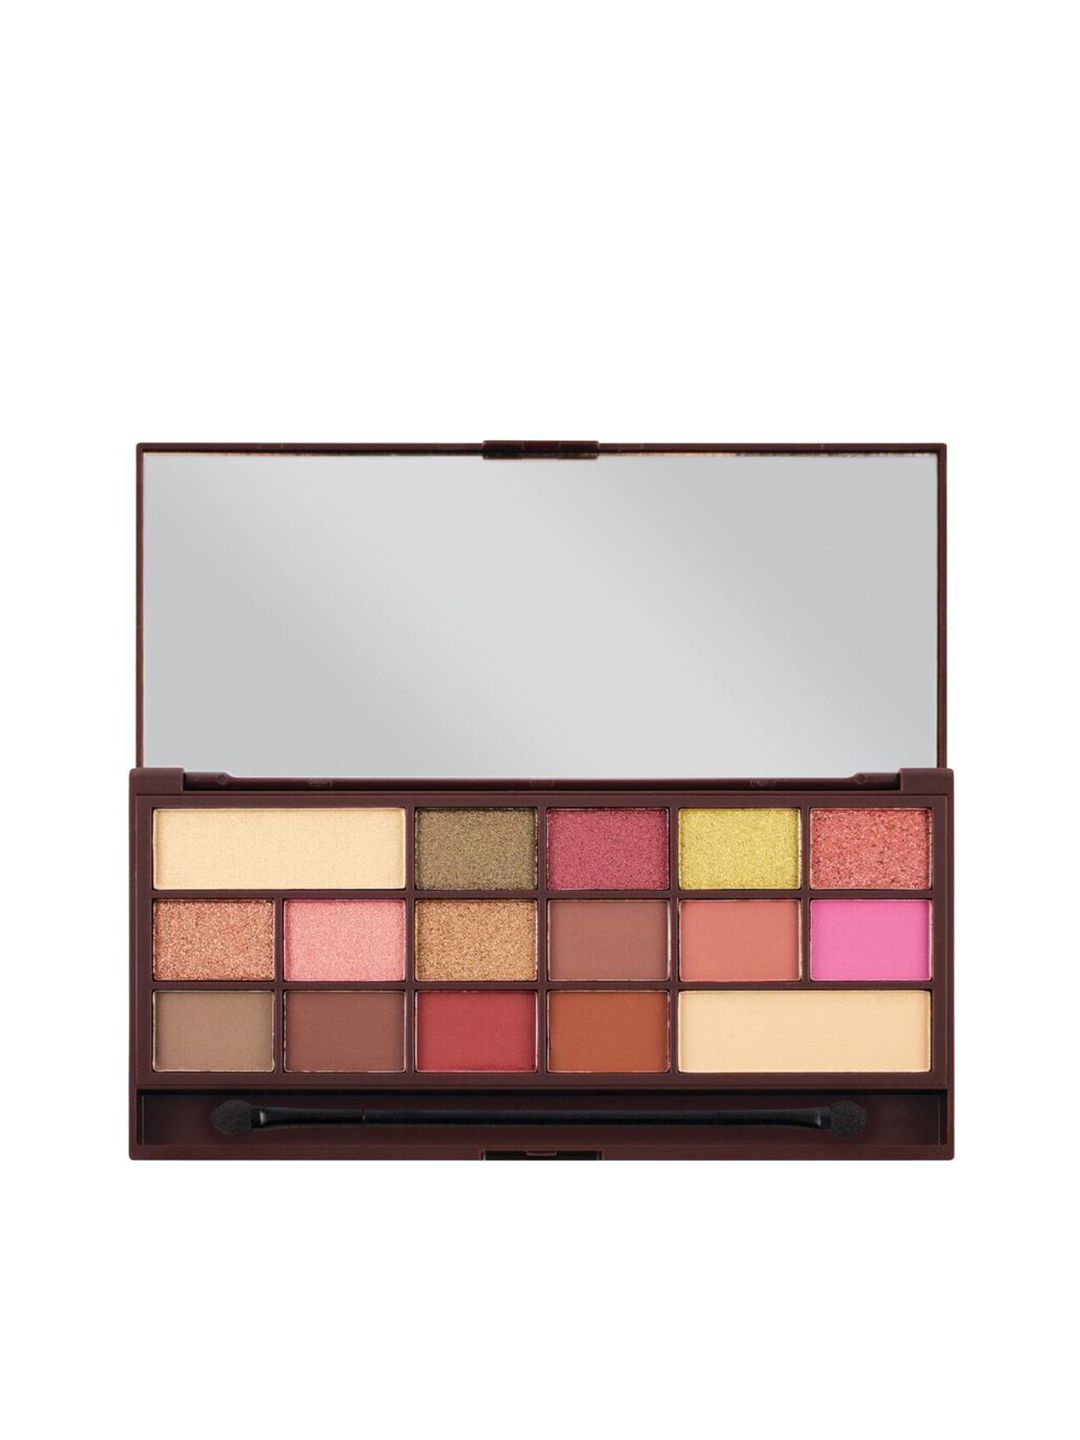 Makeup Revolution London I Heart Makeup Eyeshadow Pallet - Chocolate Rose Gold 21.96g Price in India